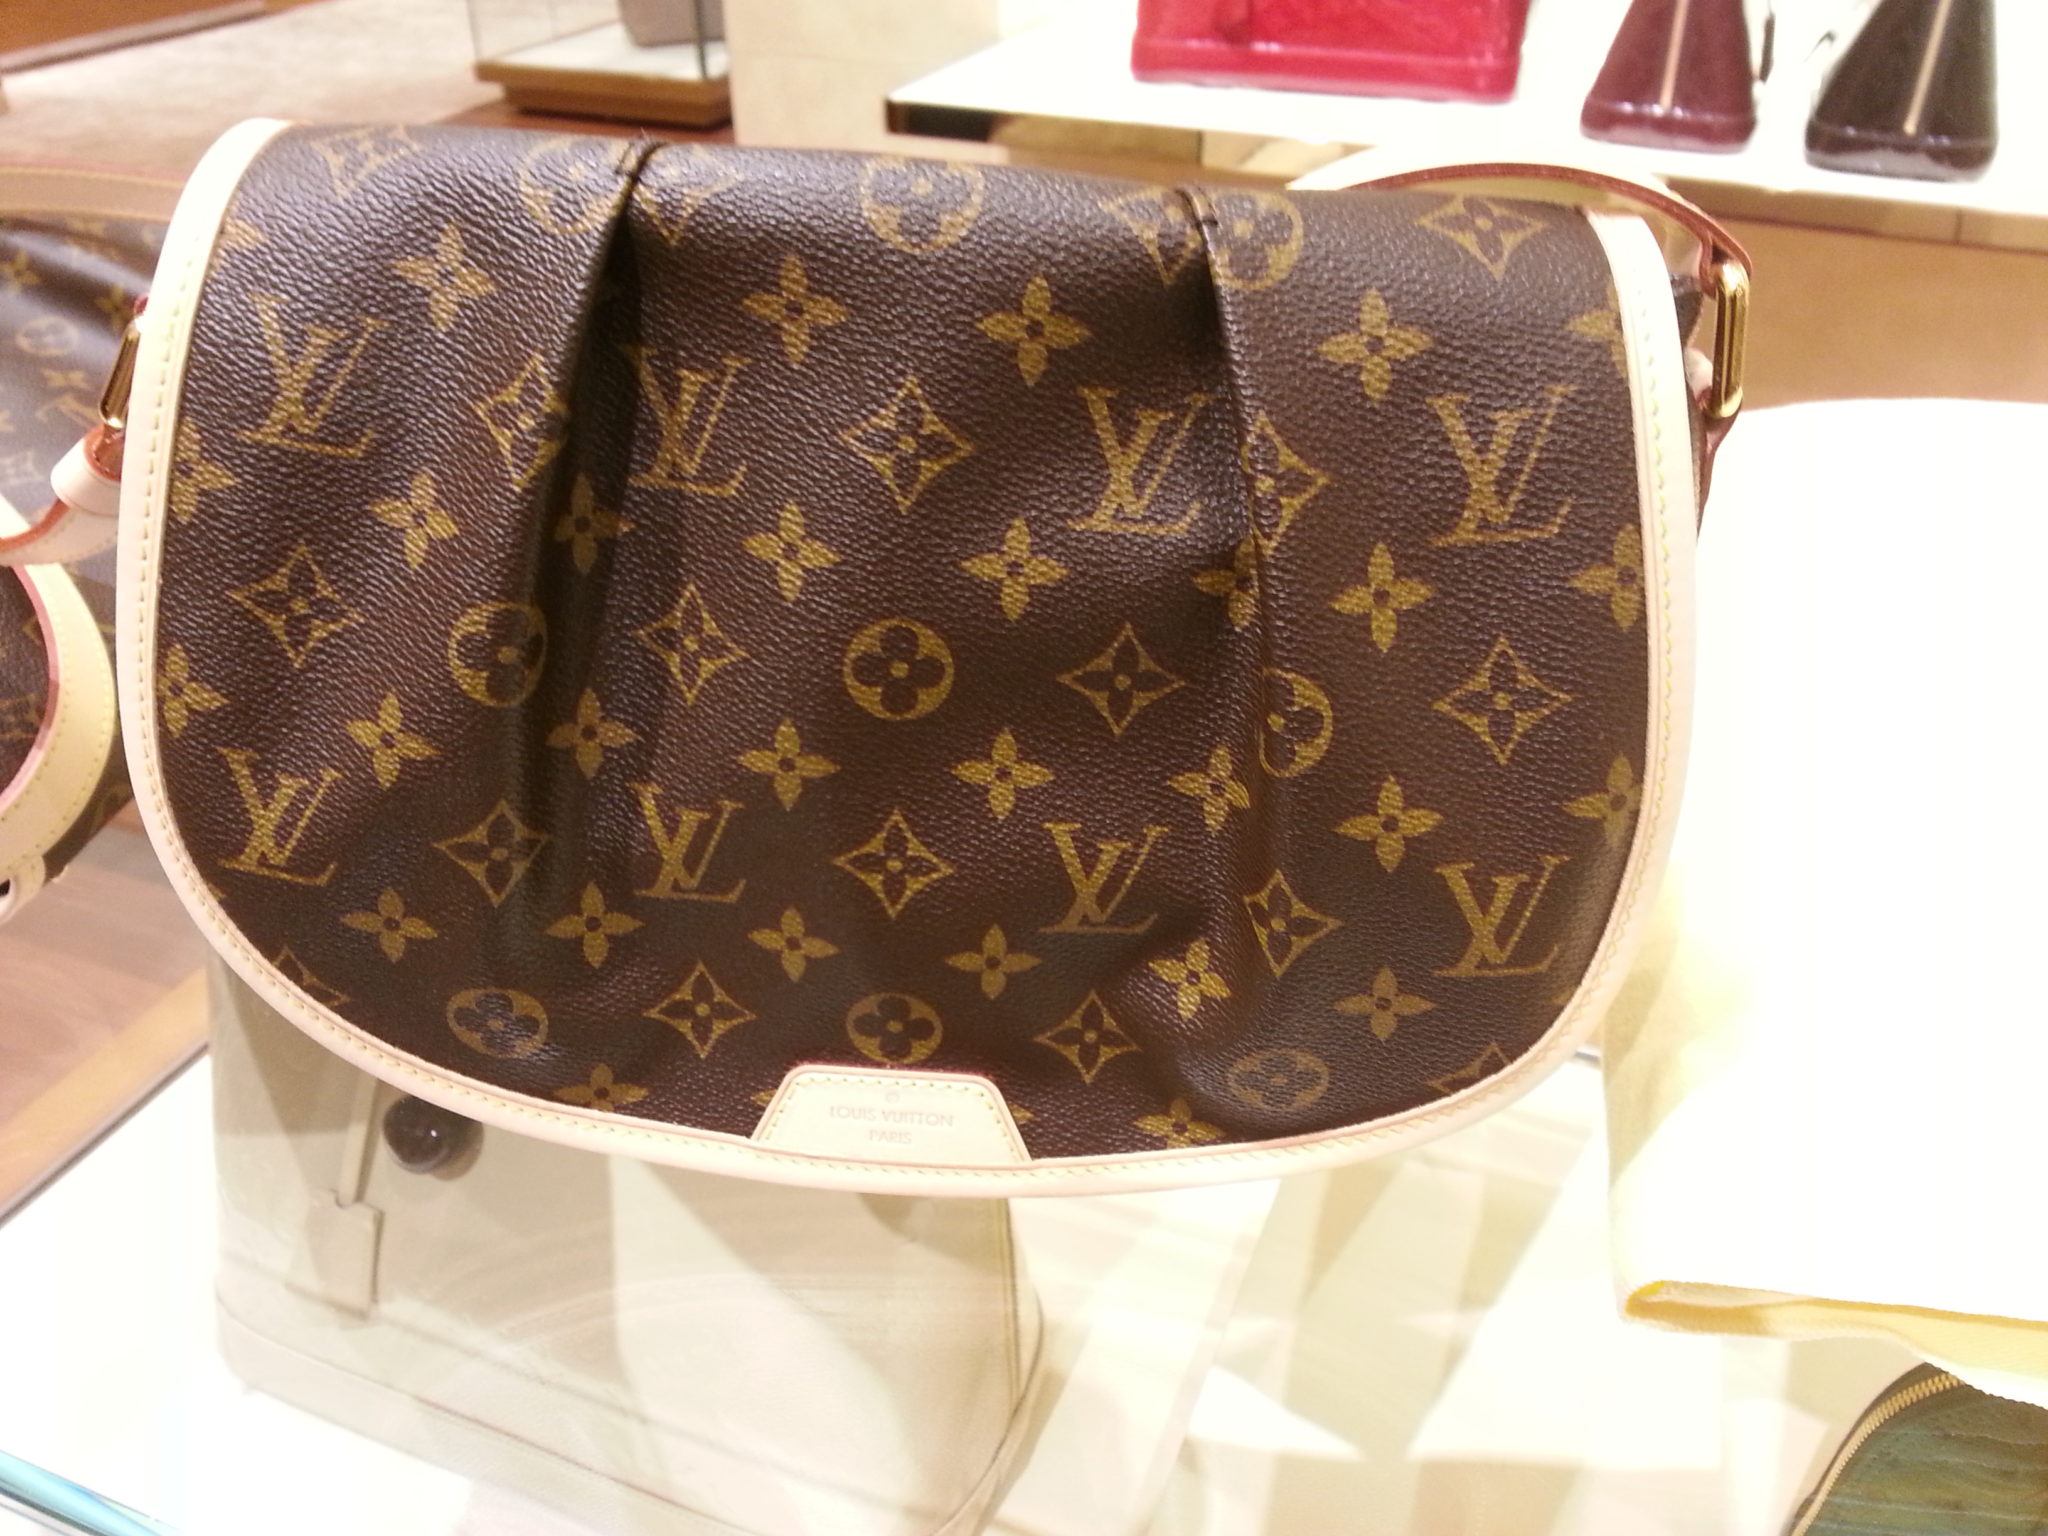 Louis Vuitton Purses - Are They Worth It?